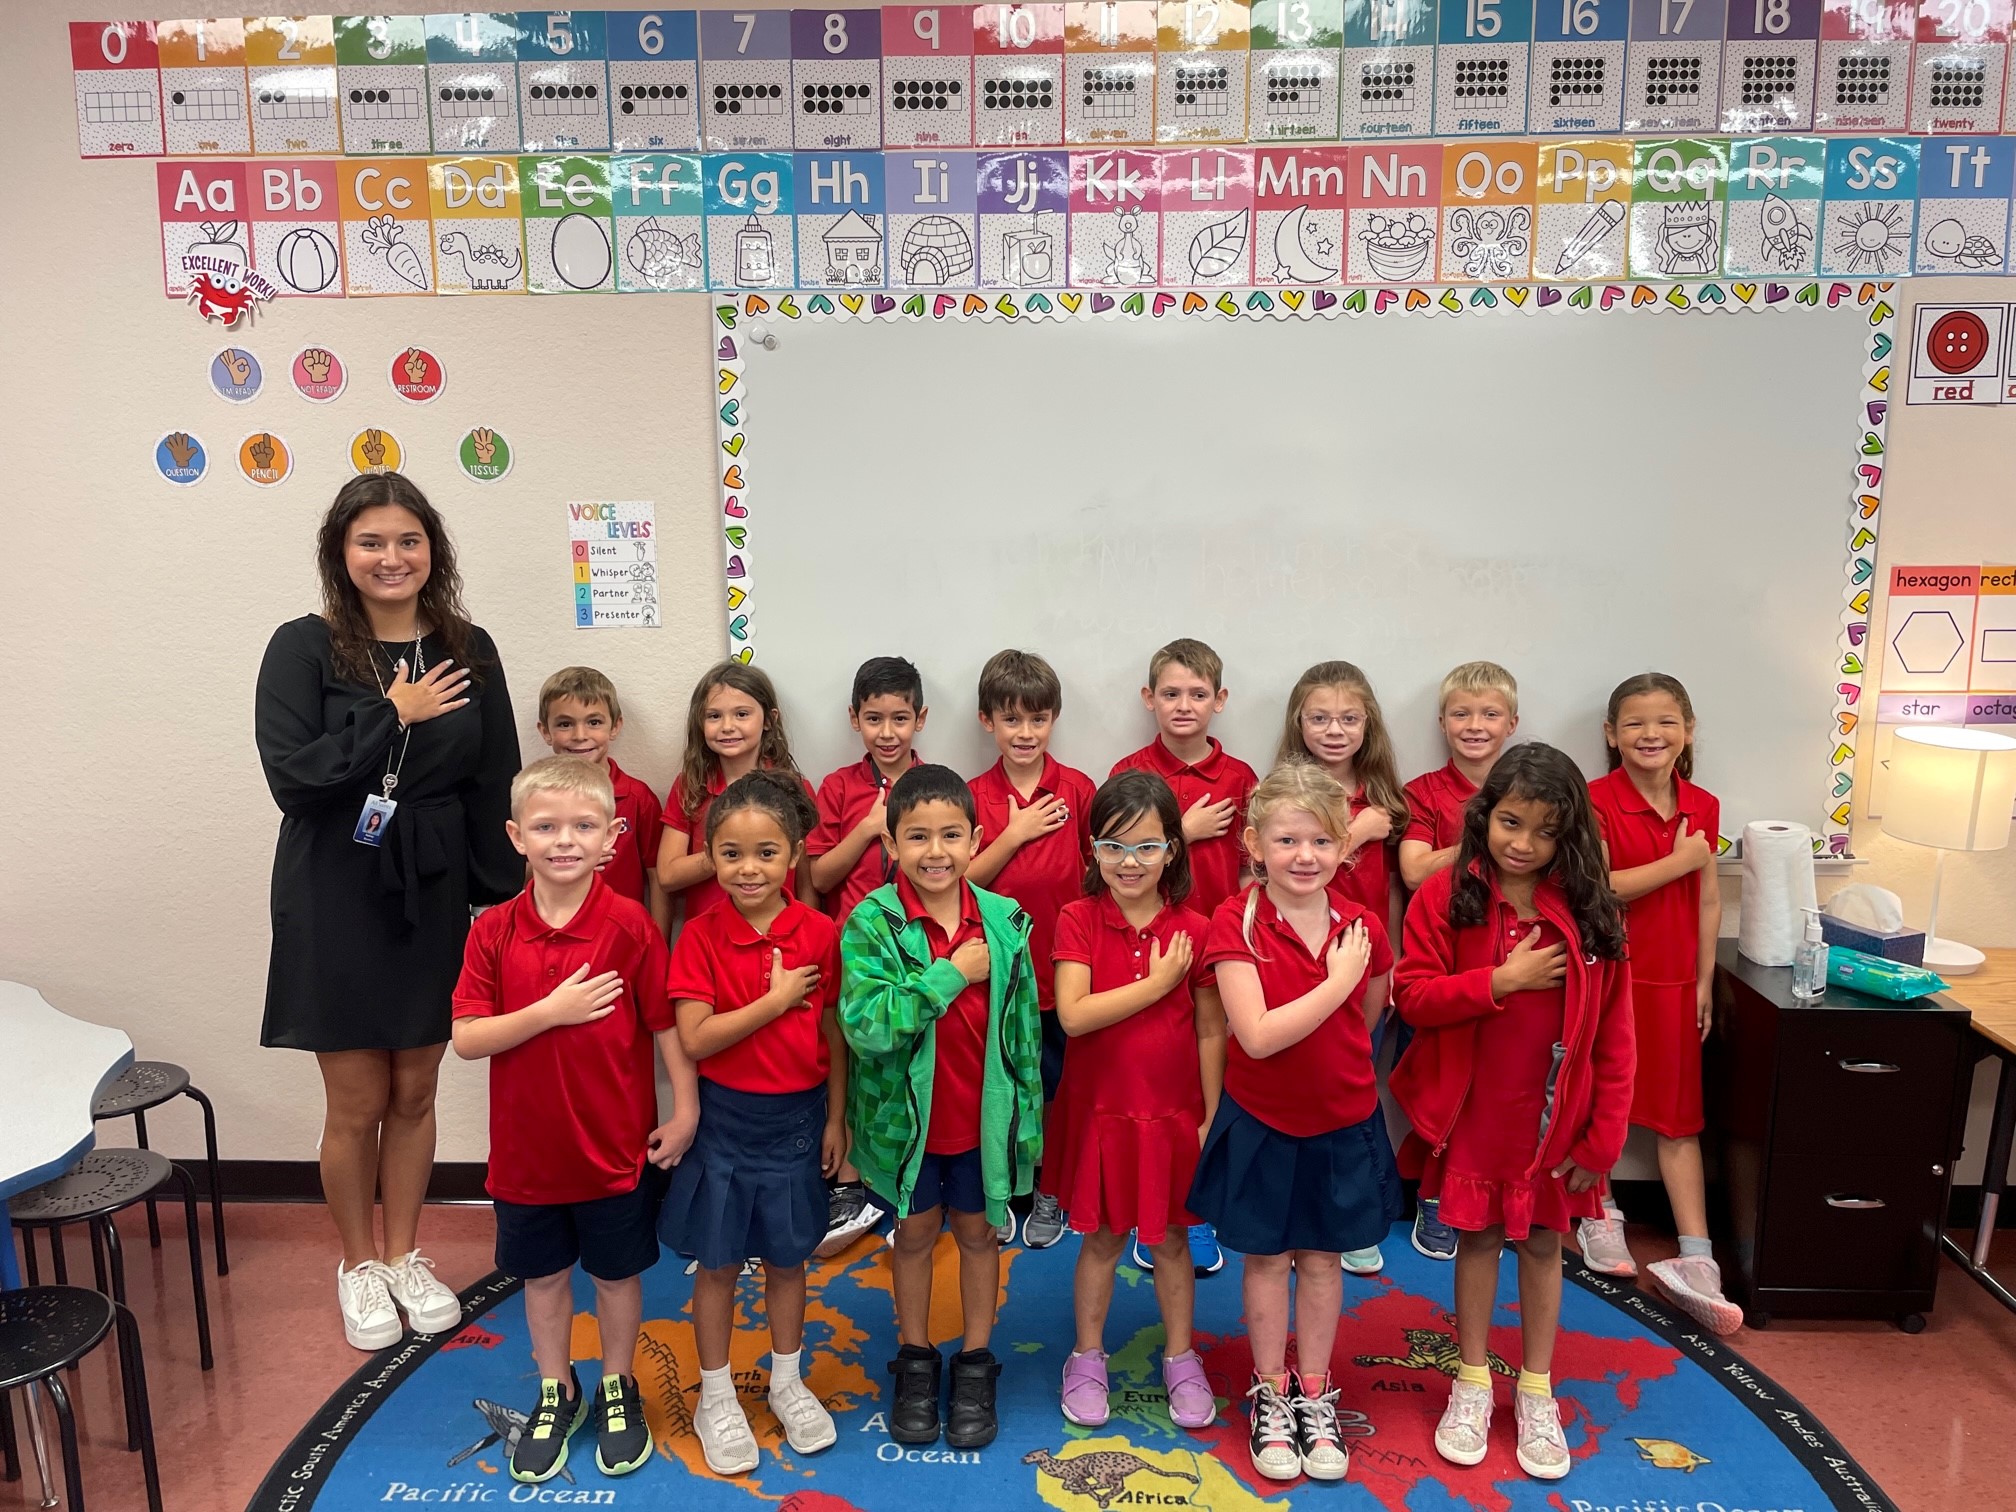 Class of the Day – Miss Blystone’s First Grade Class